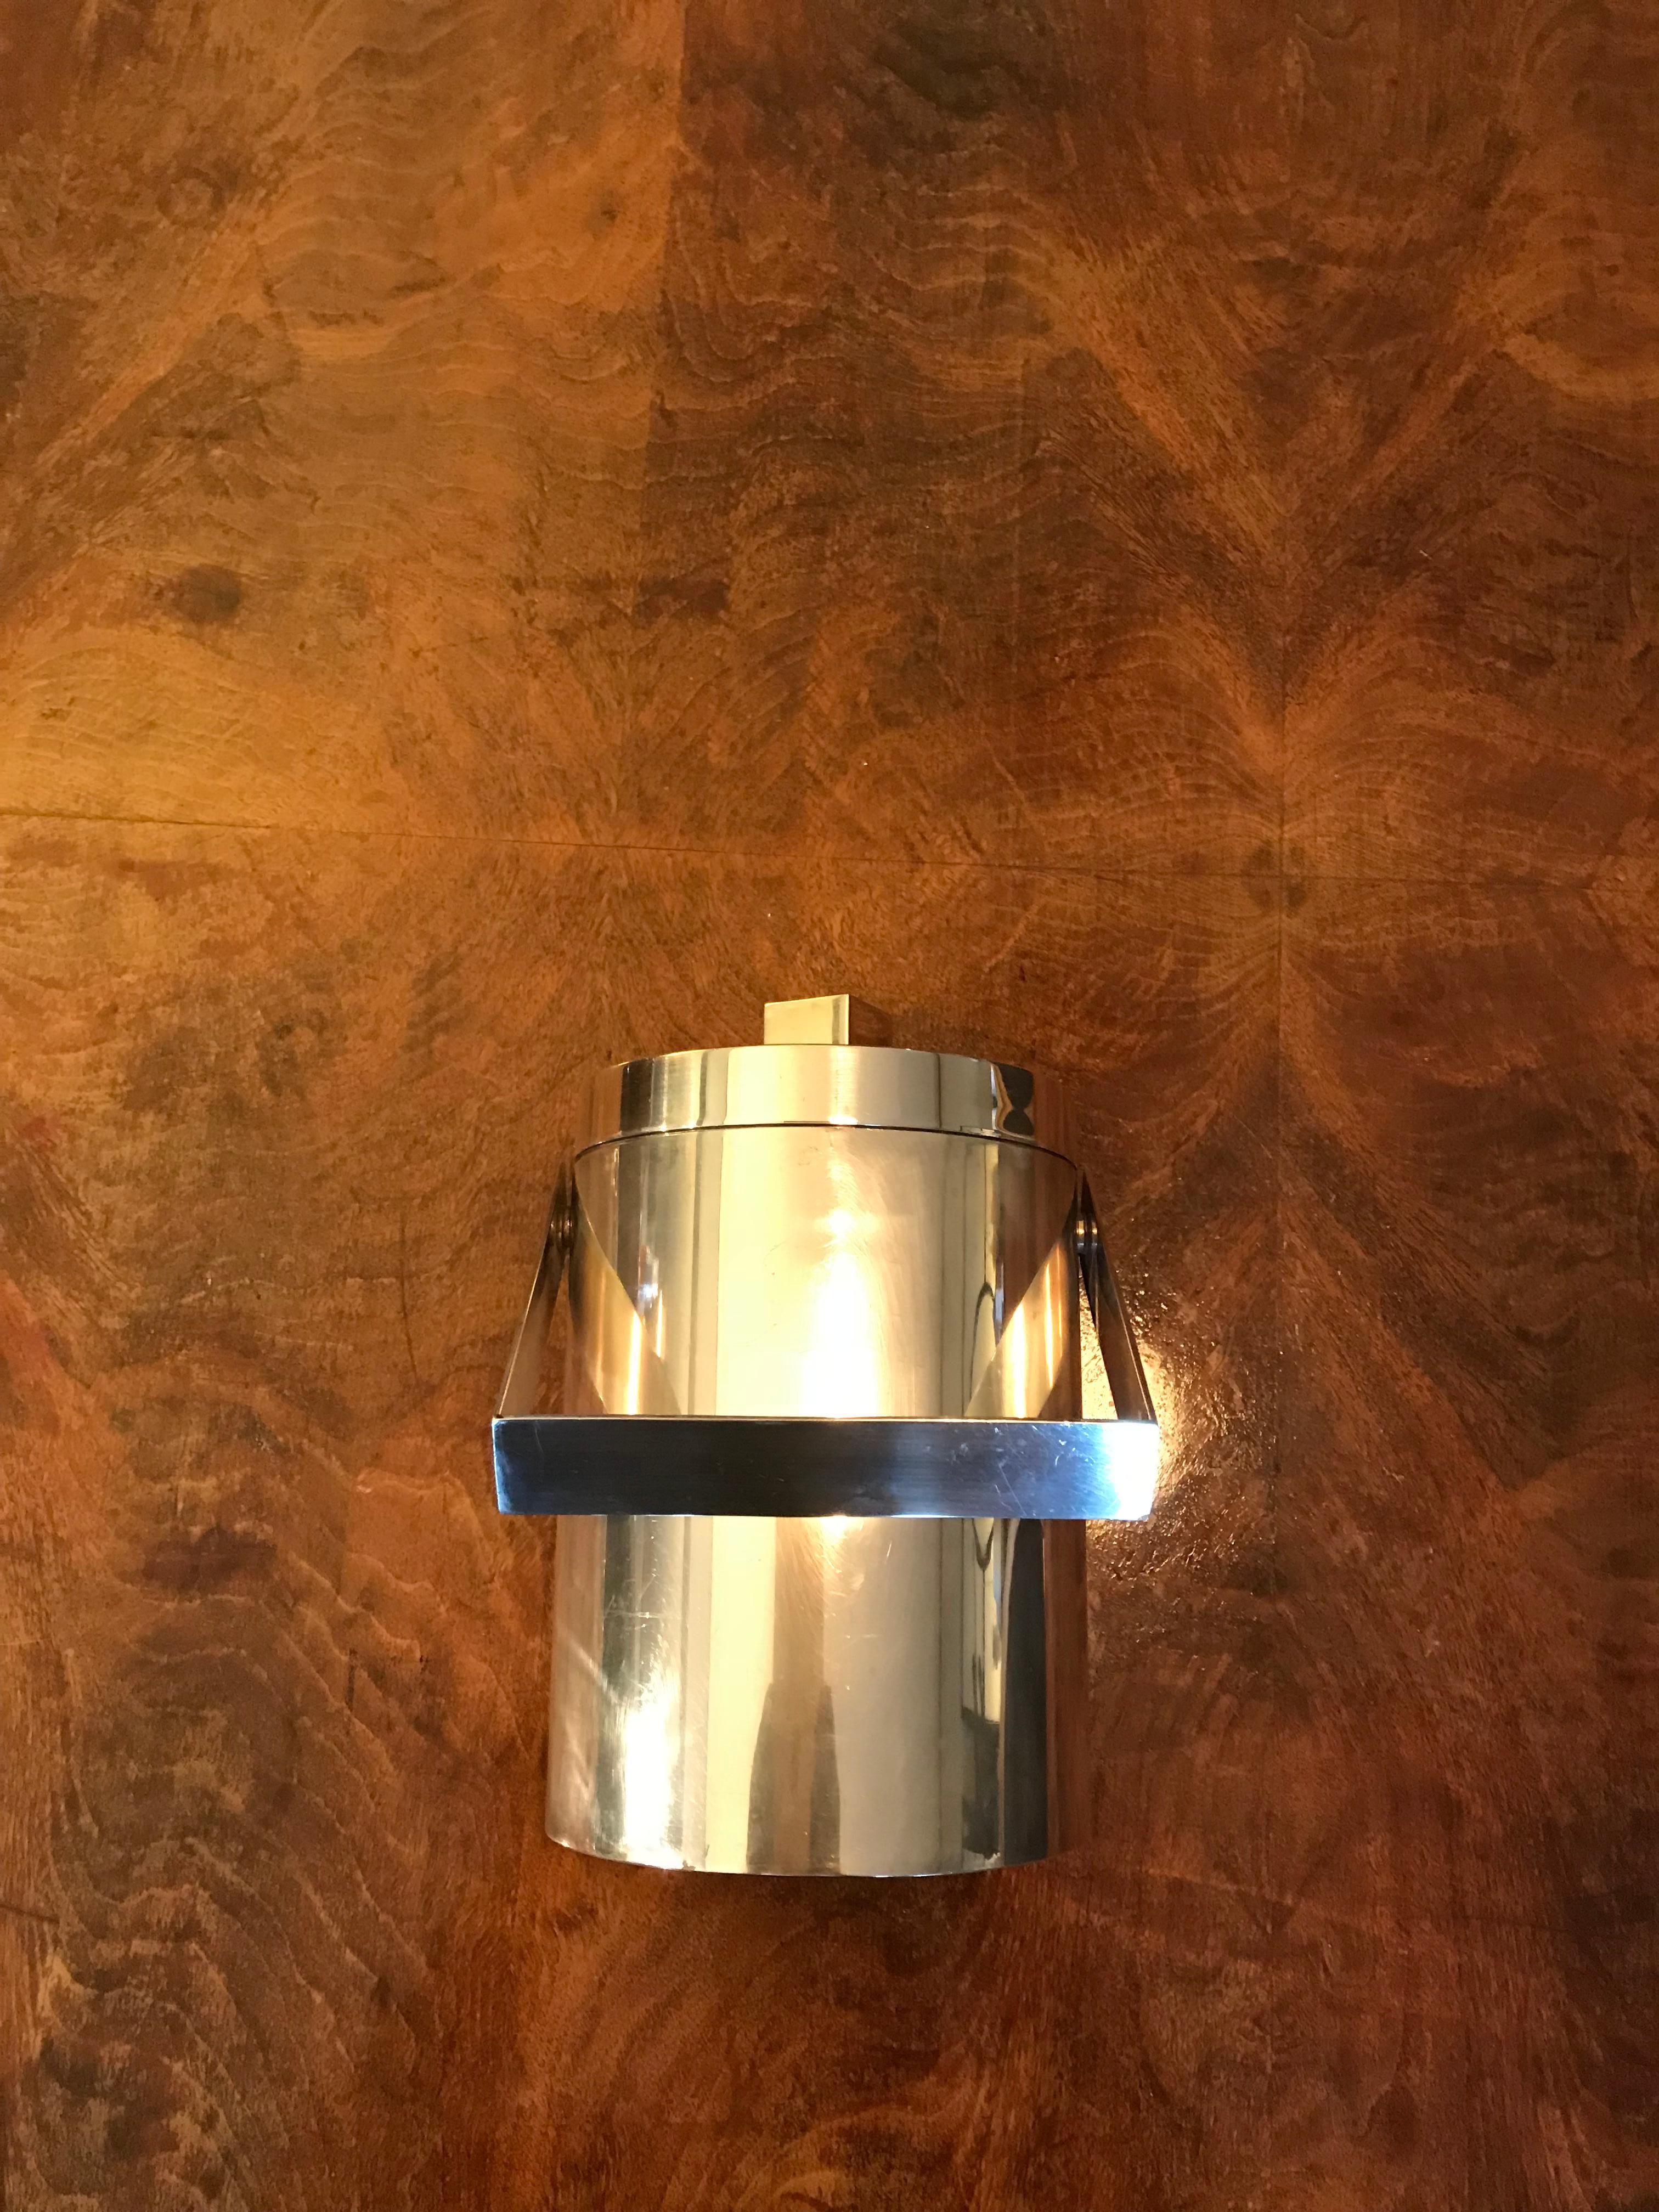 Elegant ice bucket, France, circa 1970s. Very good quality in silvered metal and copper glass inside. Beautiful lines. Geometric style with a square top holder, and great contrast between the copper and silver colors.
Dimensions: diameter 15 cm x